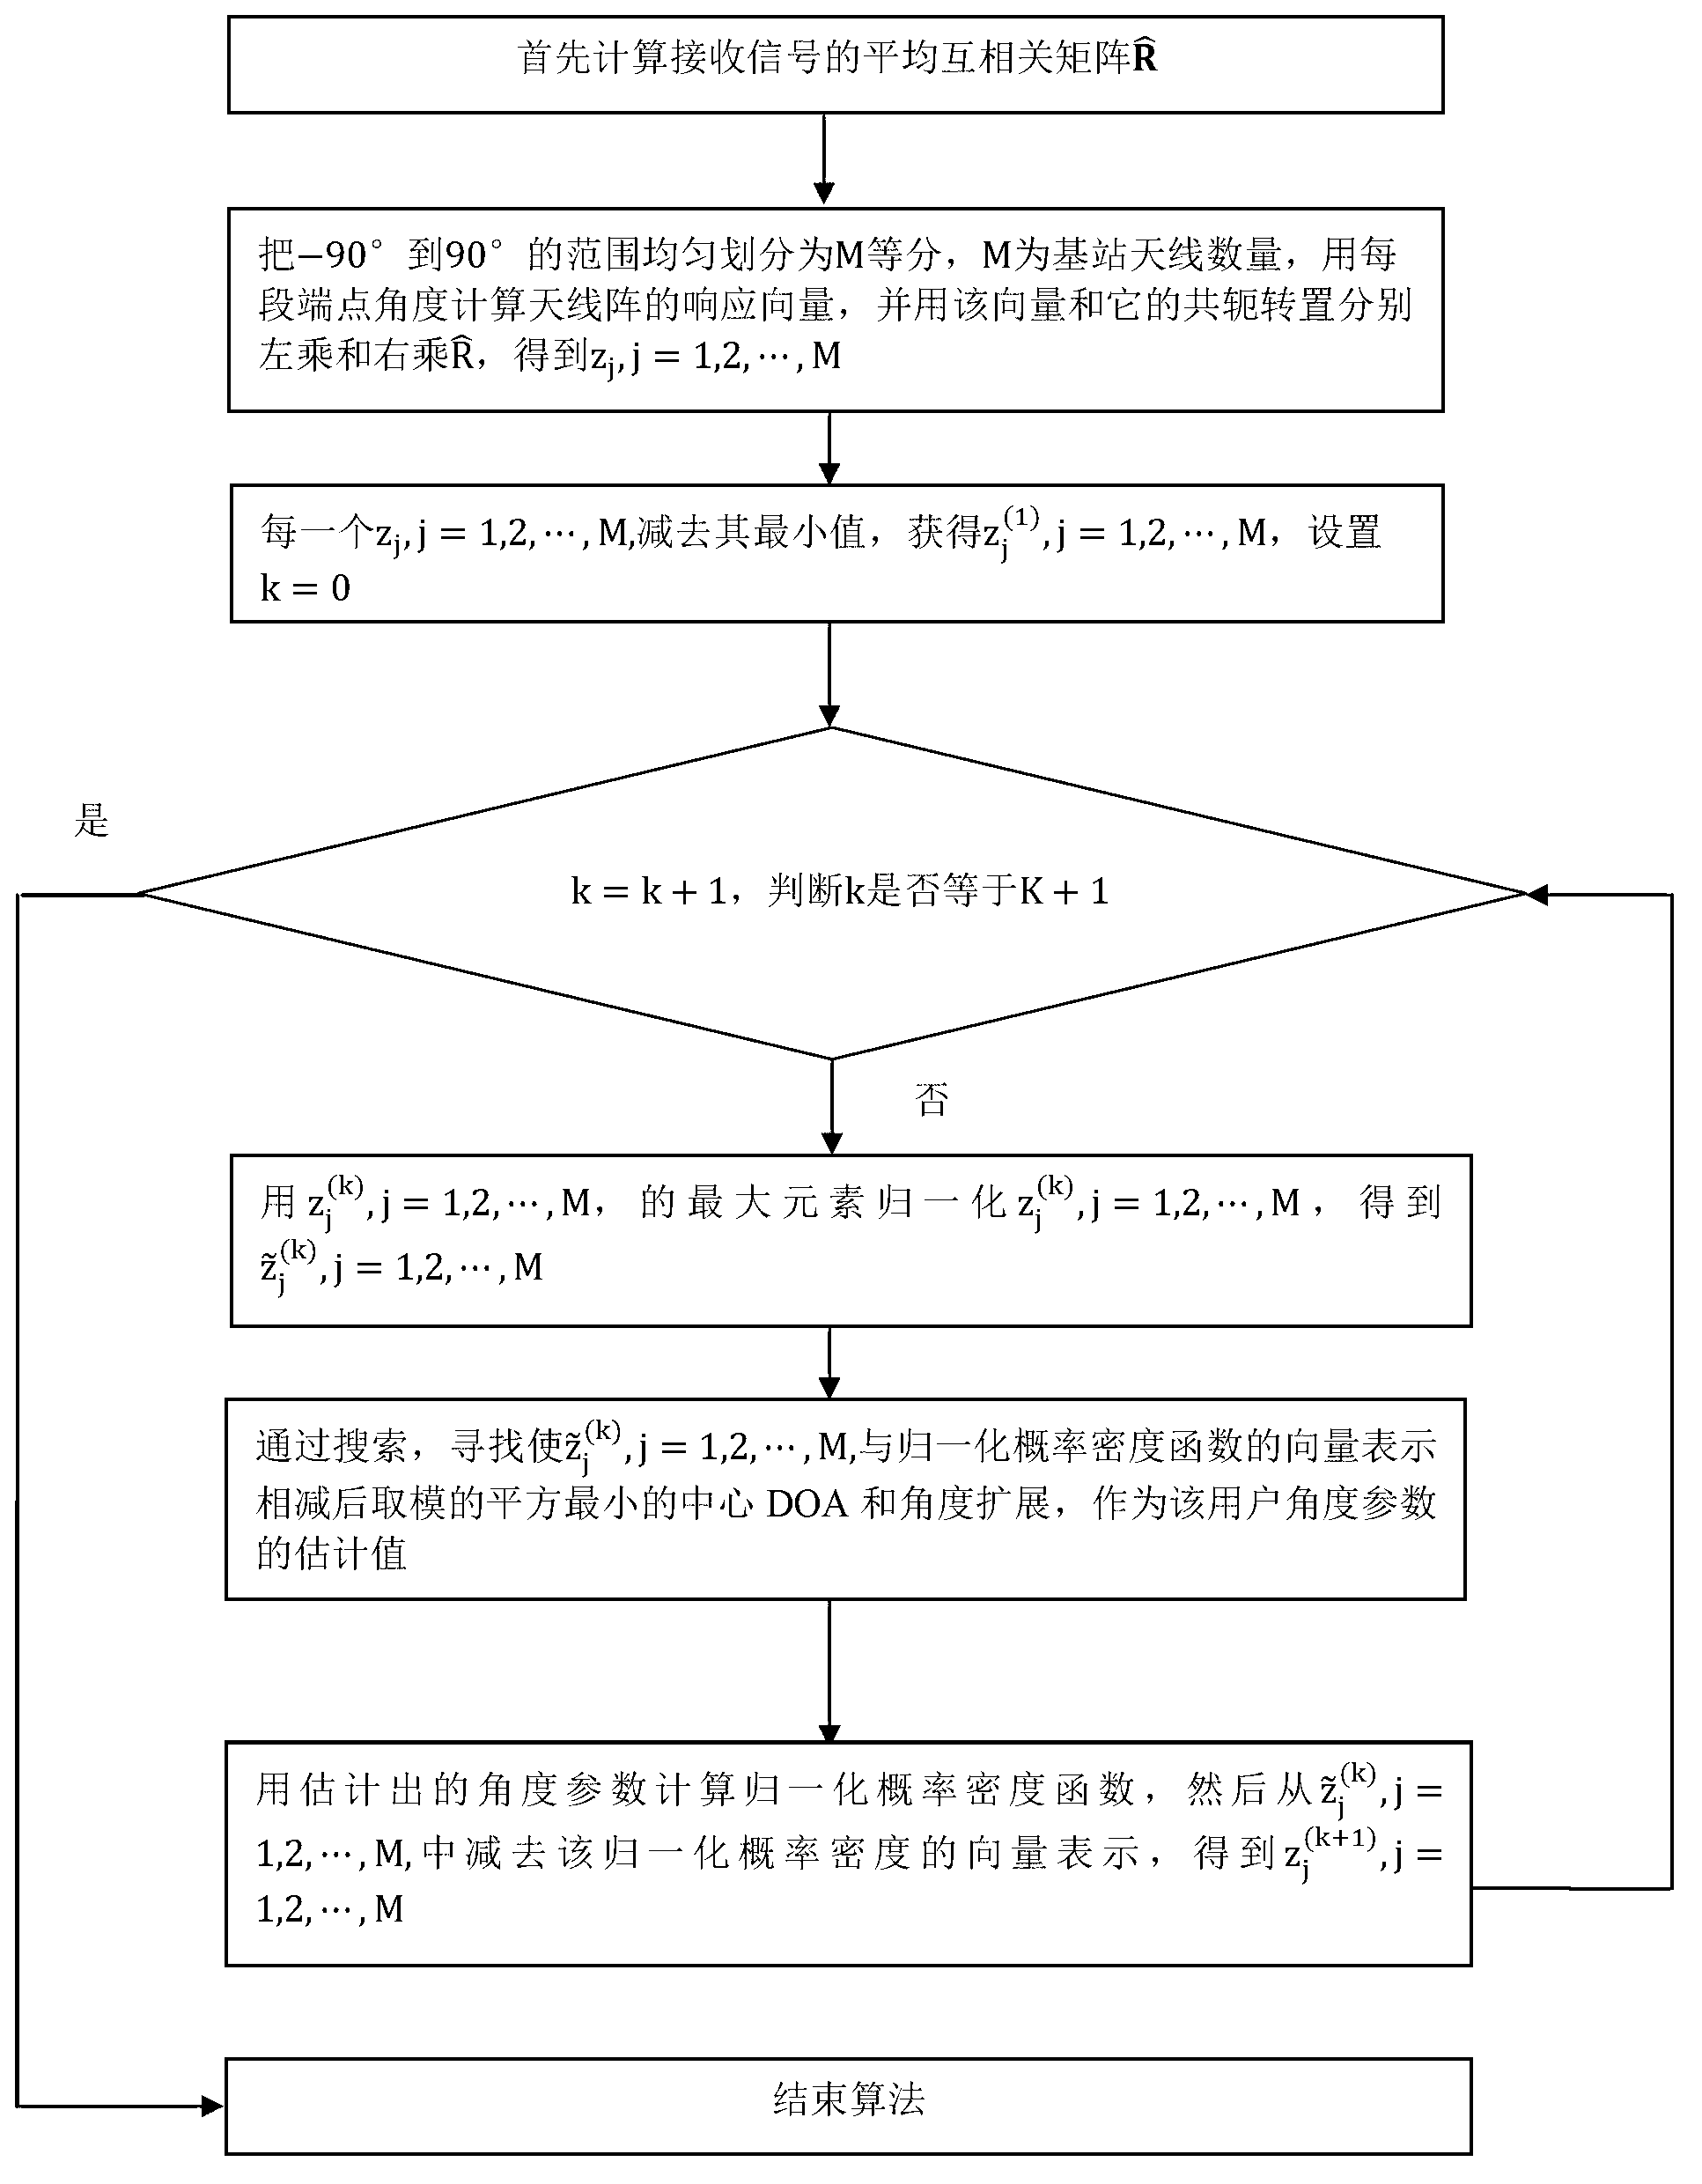 Scattering information source locating method based on distribution matching in large-scale MIMO system